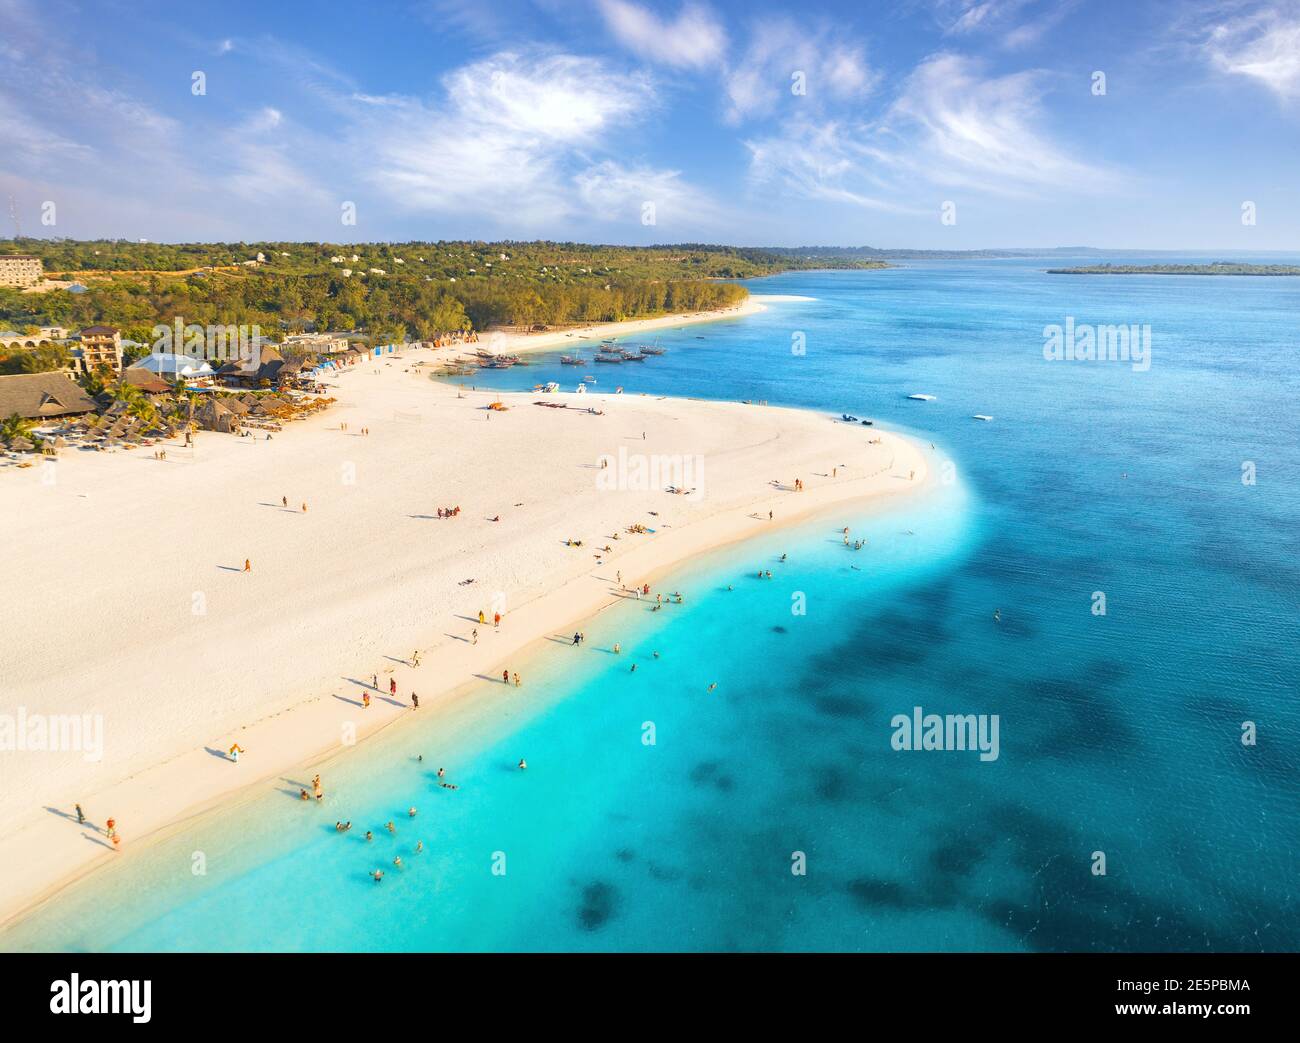 Aerial view of sandy beach of Indian Ocean at sunset. Stock Photo